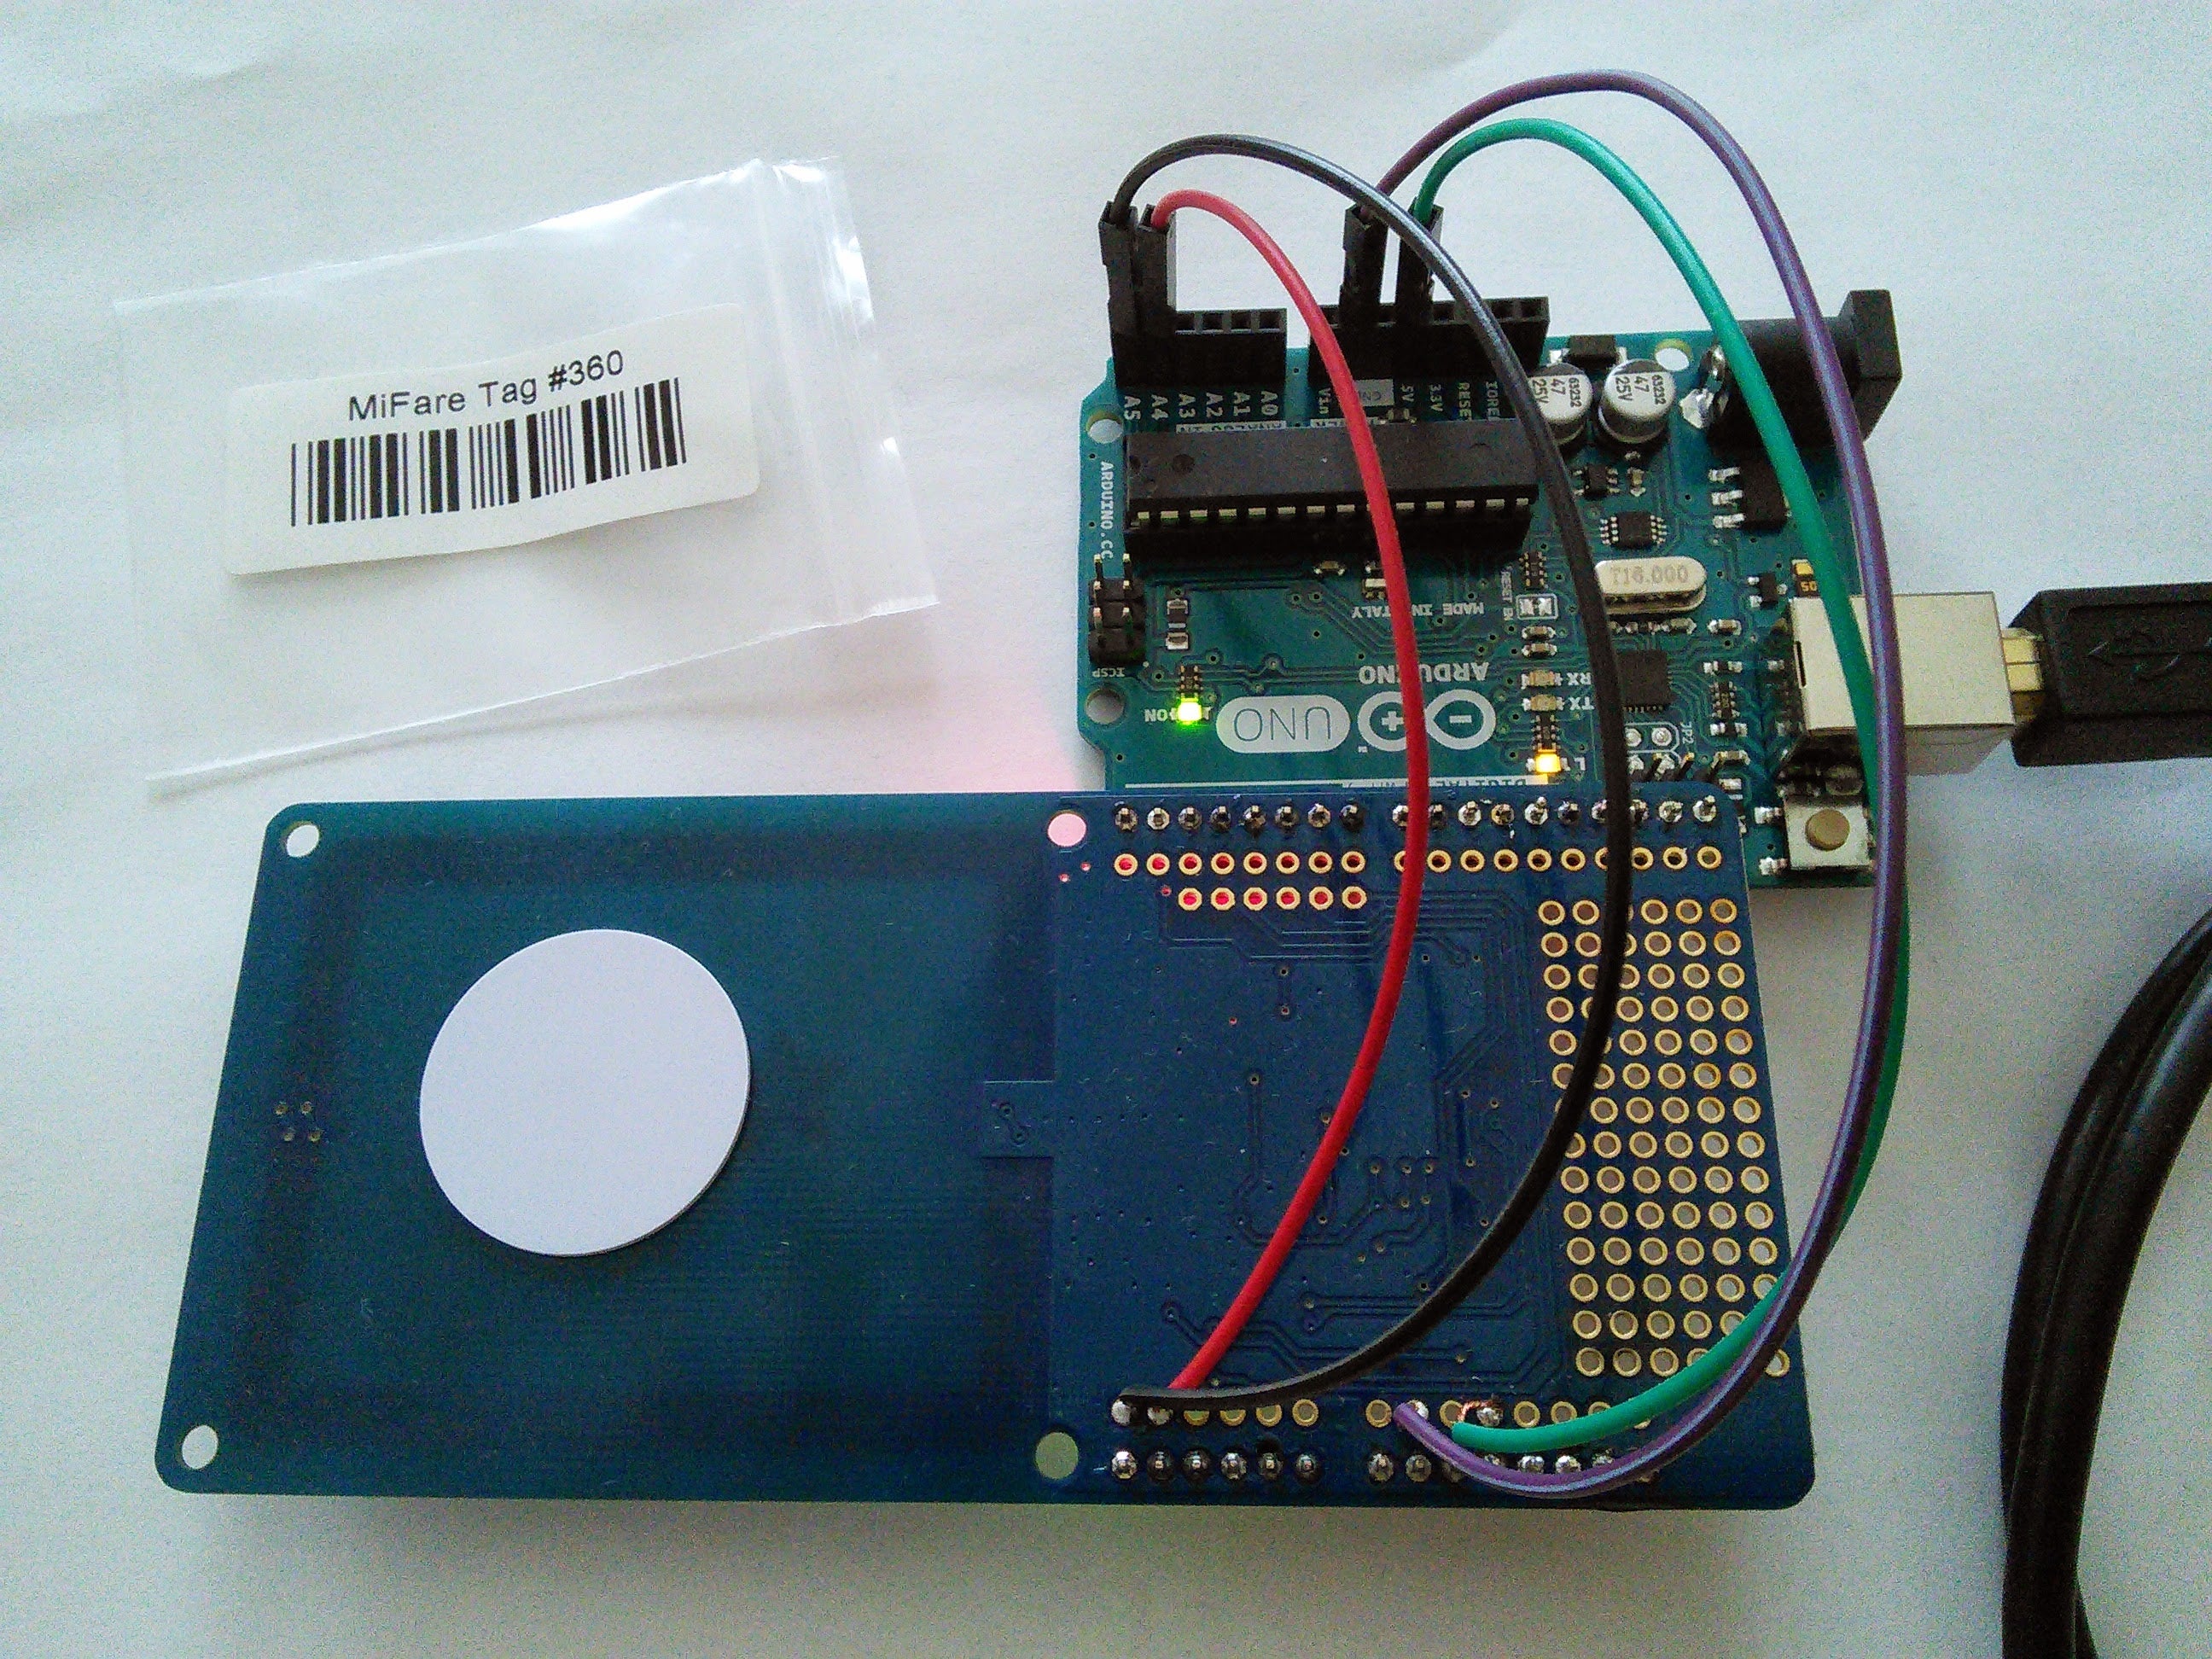 Physical set up of the shield while writing an RFID tag.